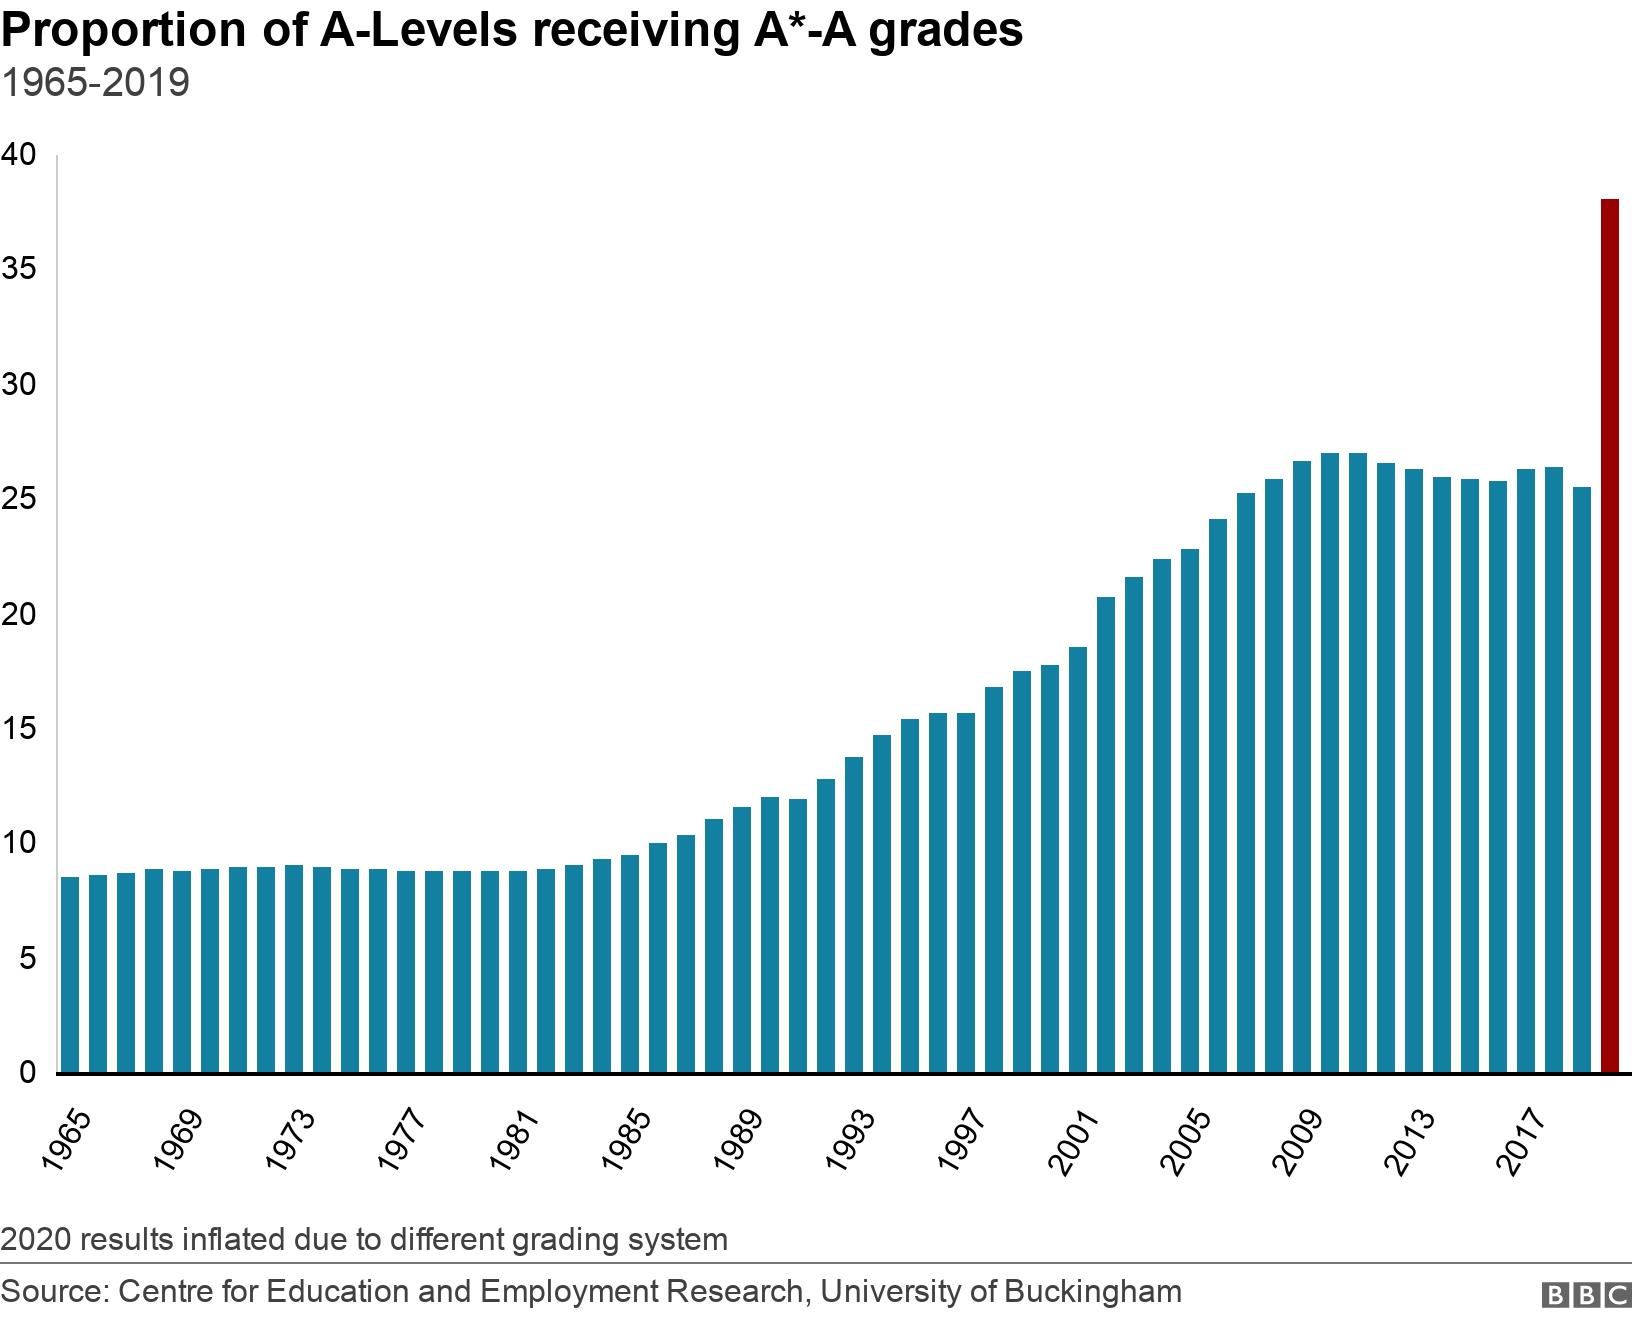 Proportion of A-Levels receiving A*-A grades. 1965-2019.  2020 results inflated due to different grading system.